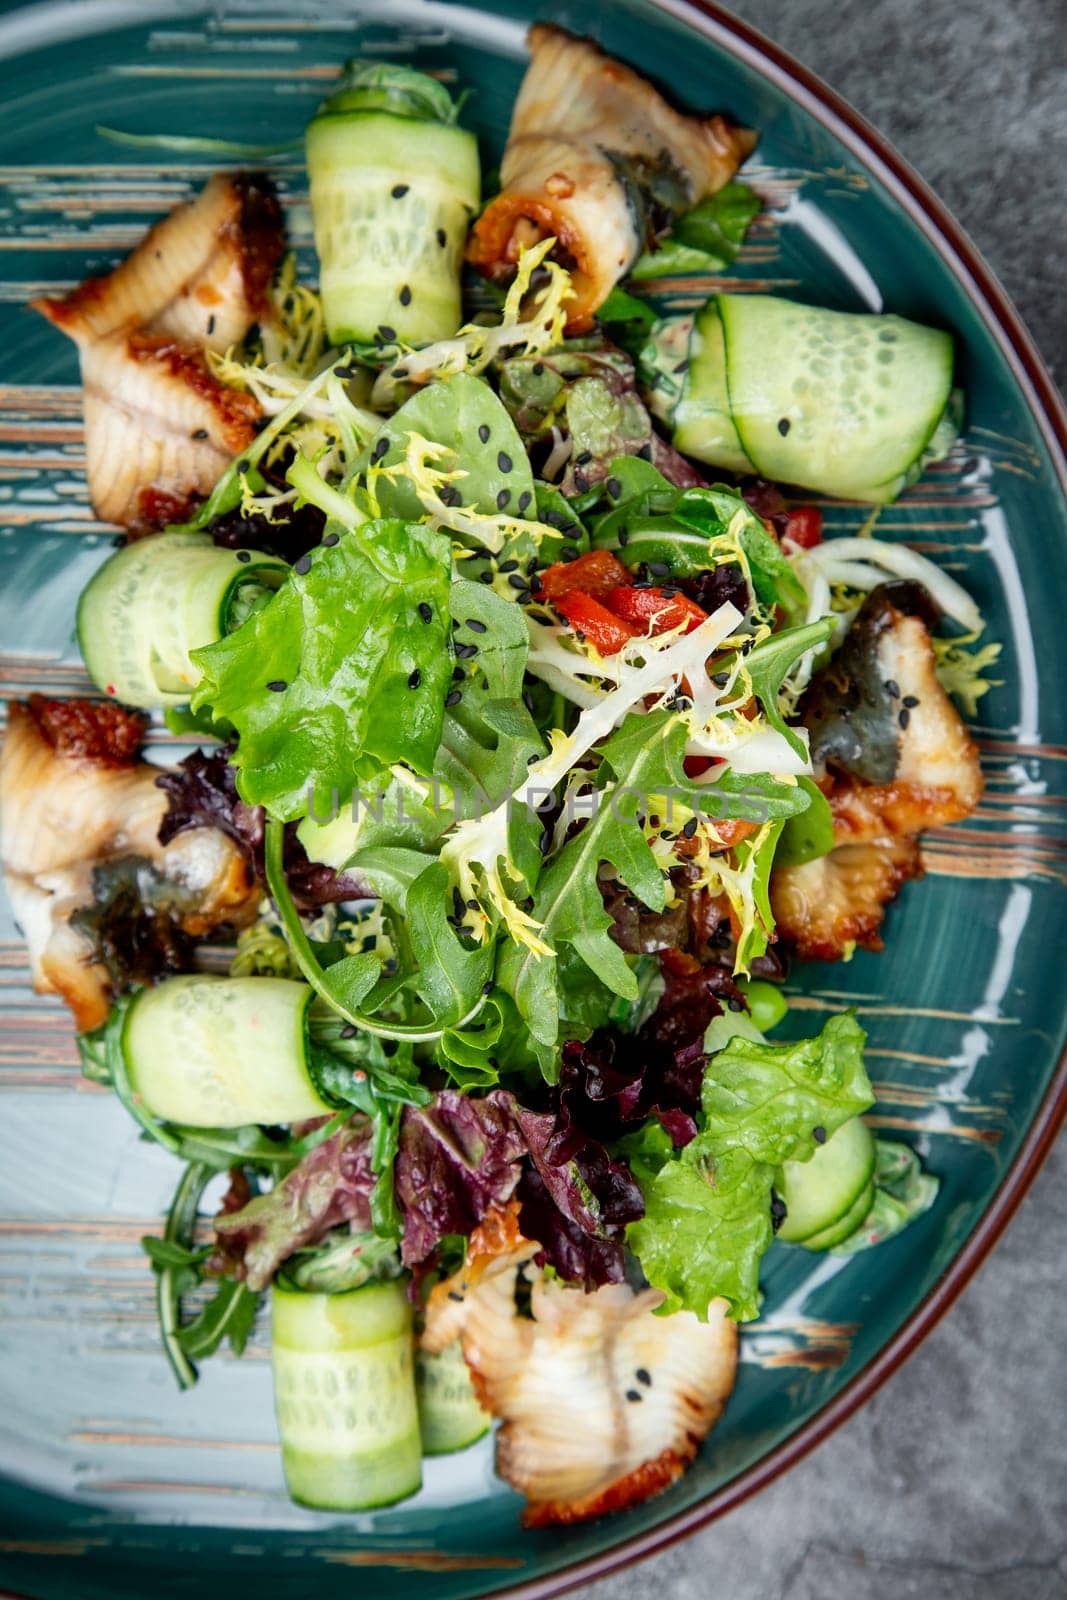 salad with arugula, lettuce, cucumber rolls, fish and sesame seeds, top view by tewolf